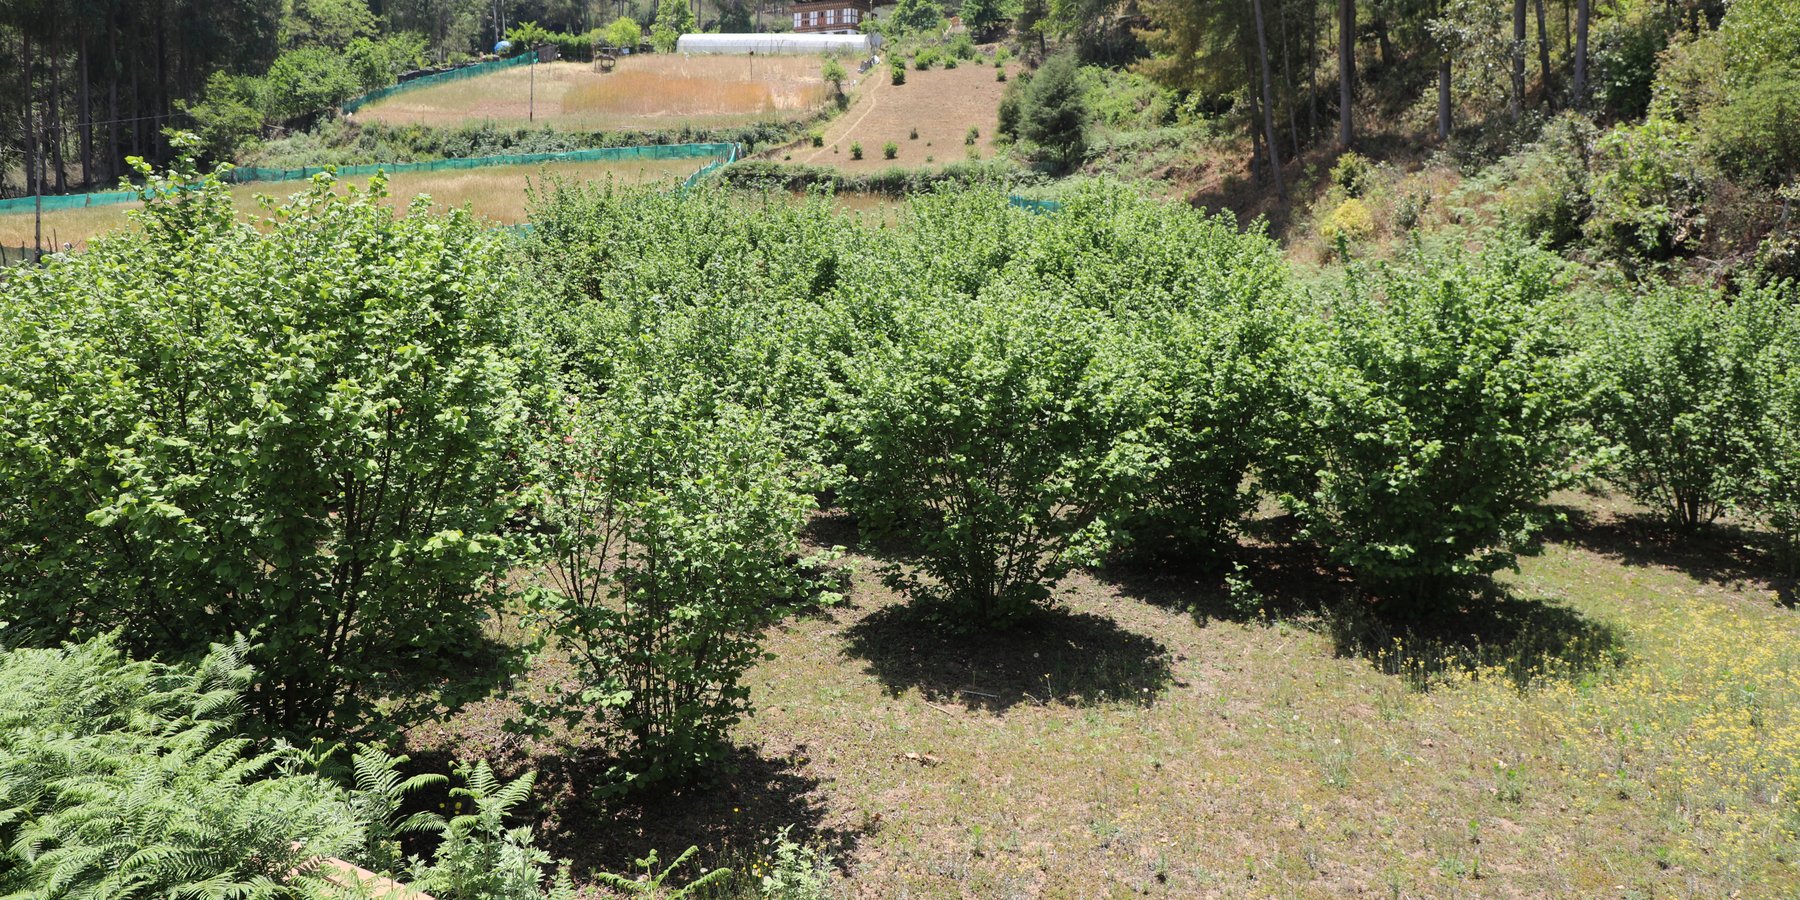 Typical Mountain Hazelnut Orchards established through the approach